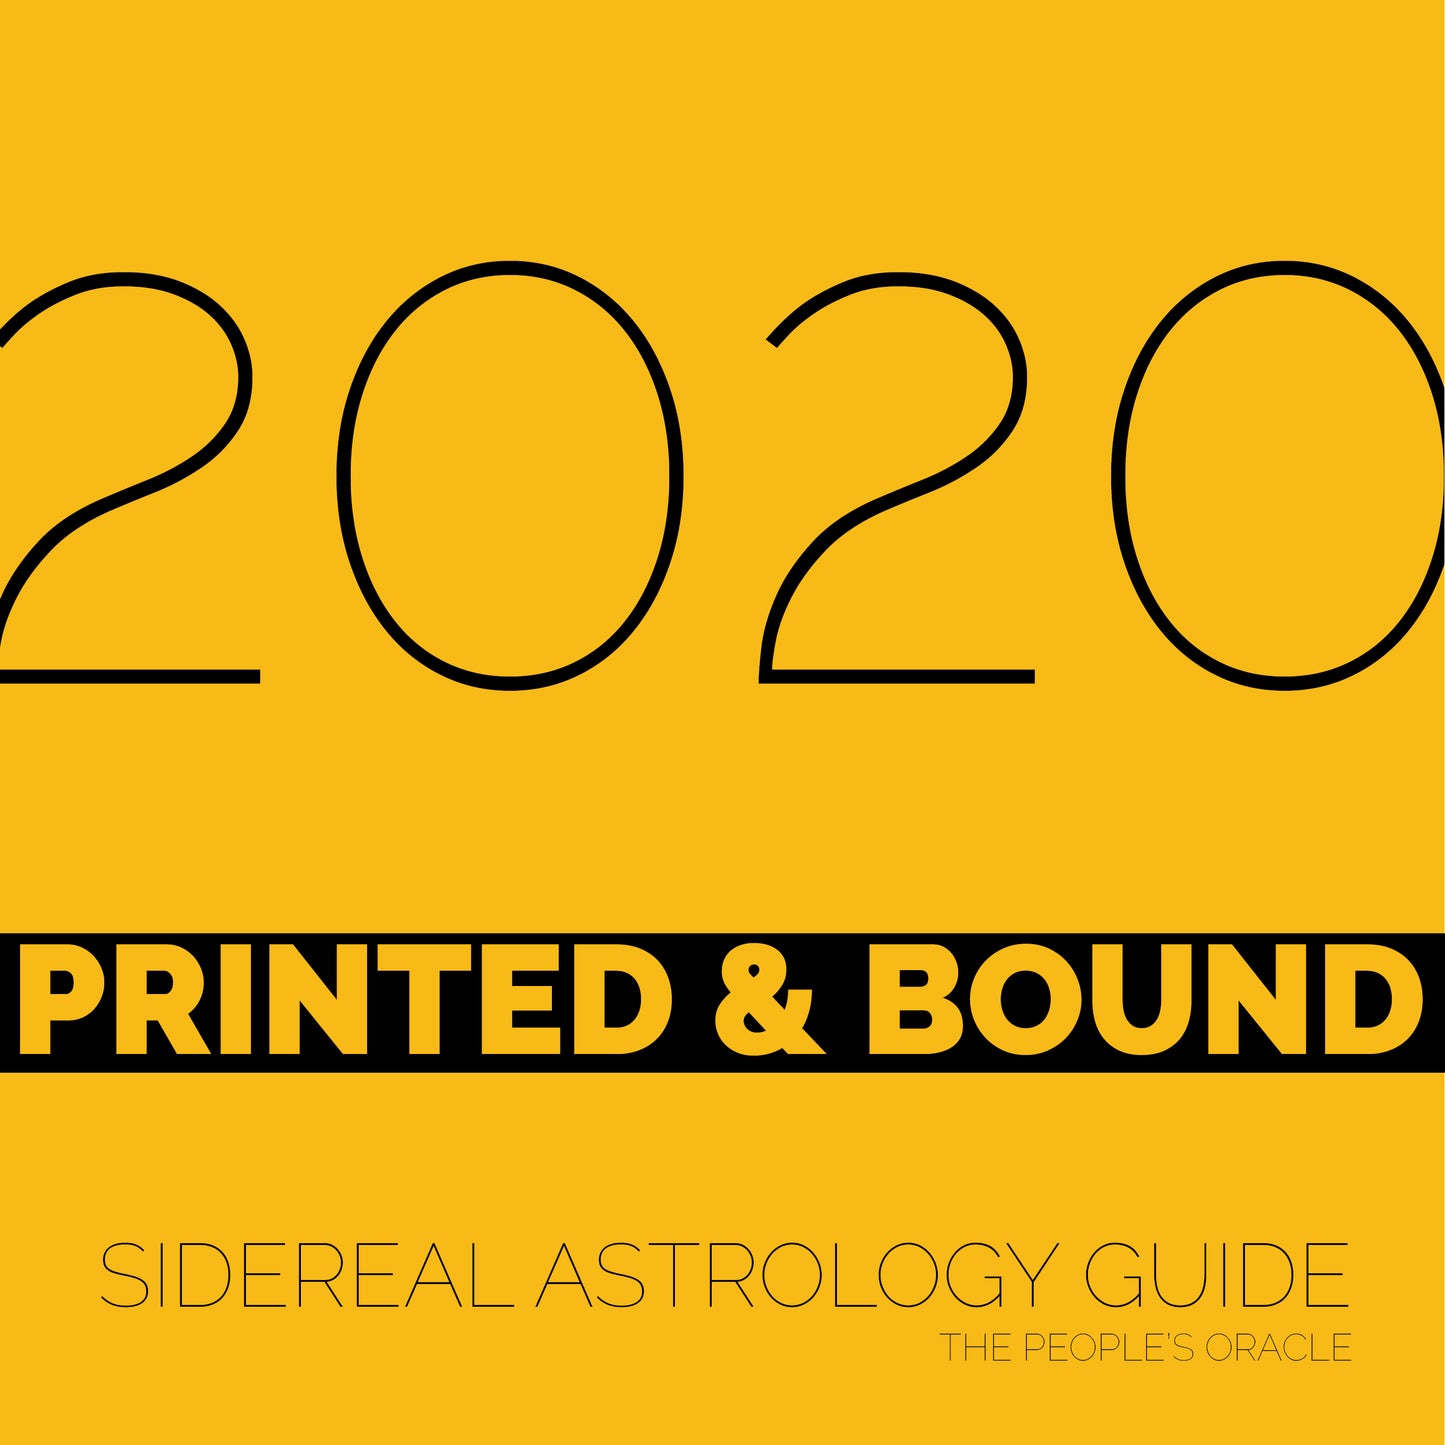 2020 Sidereal Astrology Guide (PRINTED & BOUND)